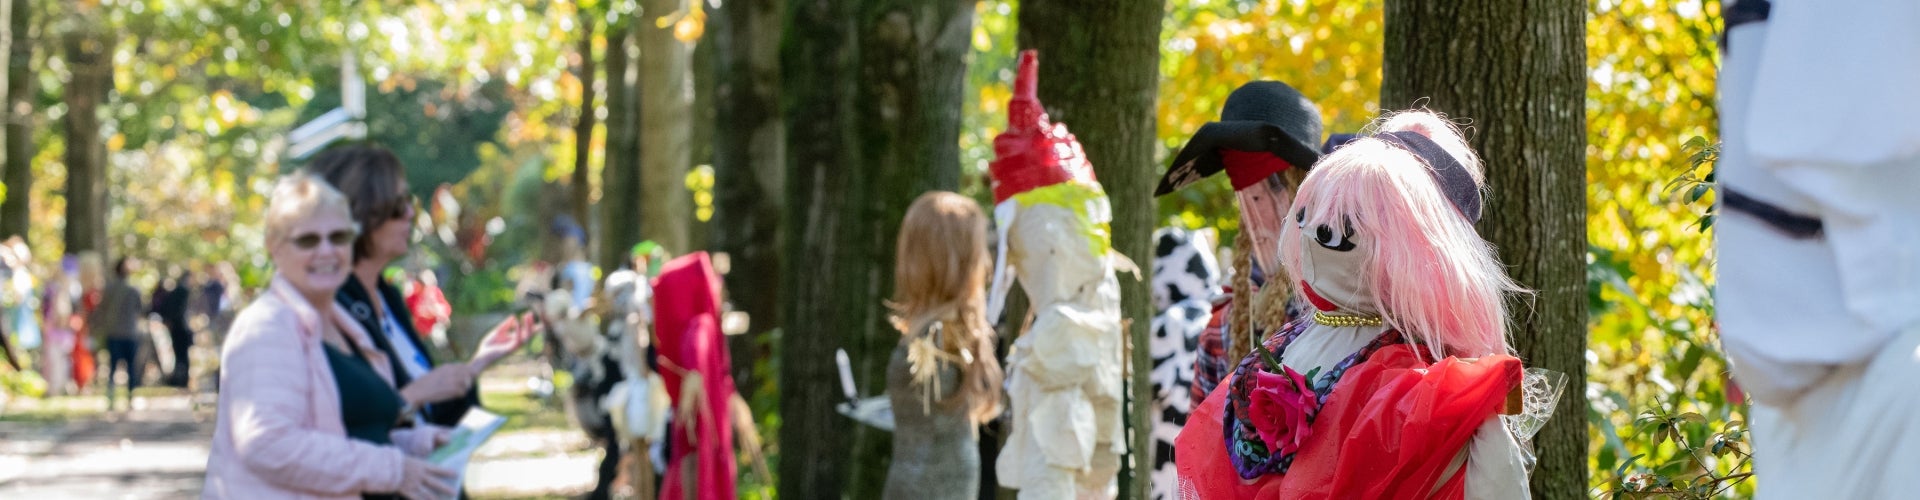 A group of women smile while looking at scarecrows in a public garden. 